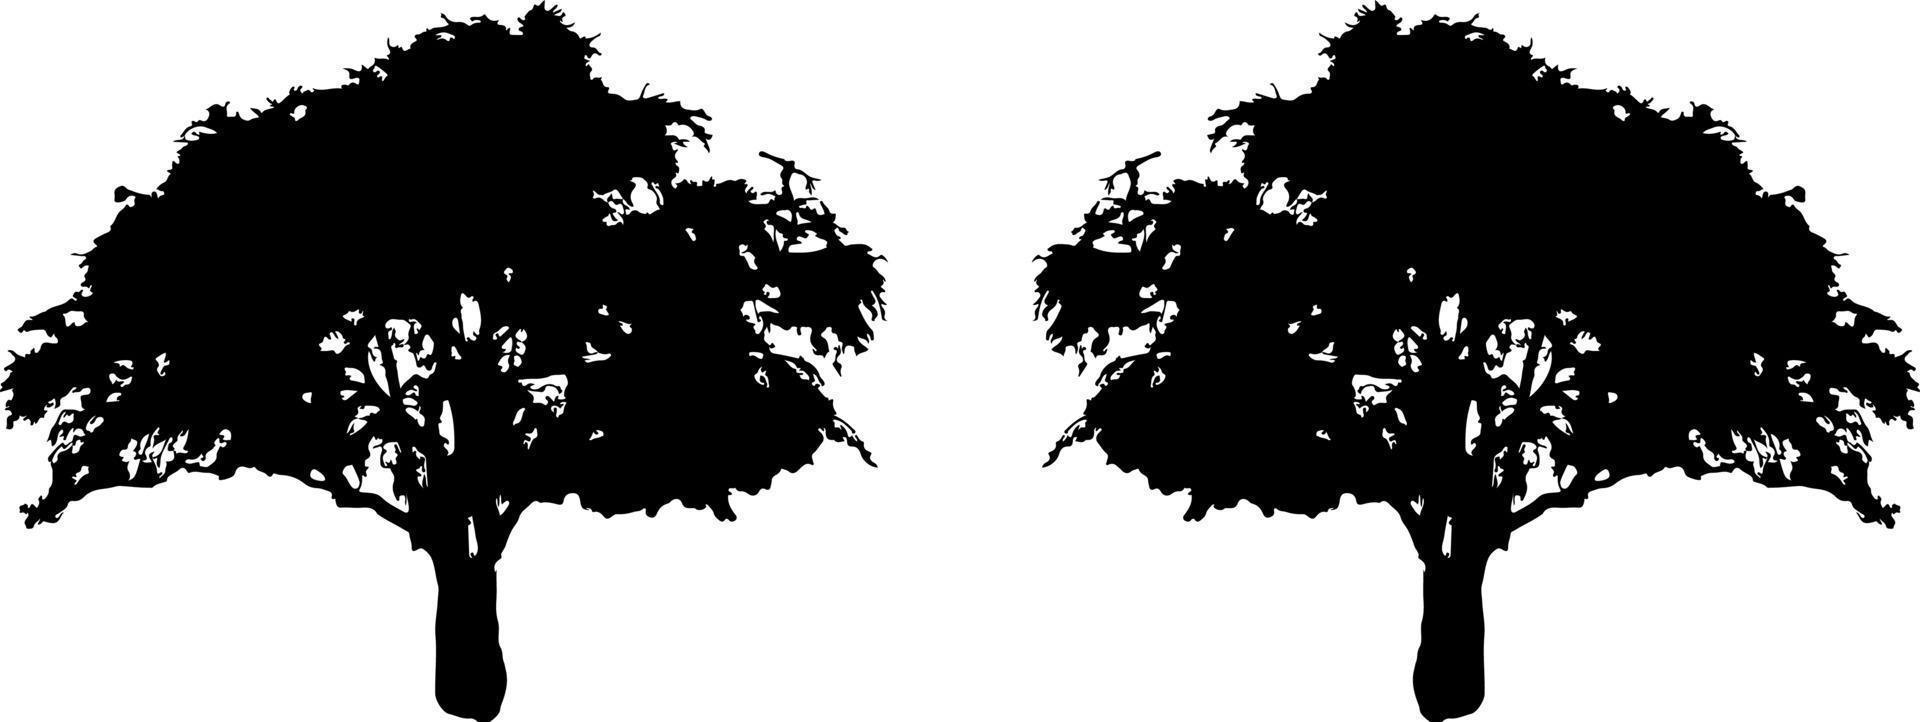 Black trees set isolated on white background. Tree silhouettes. Design of trees for posters, banners and promotional items. Vector illustration